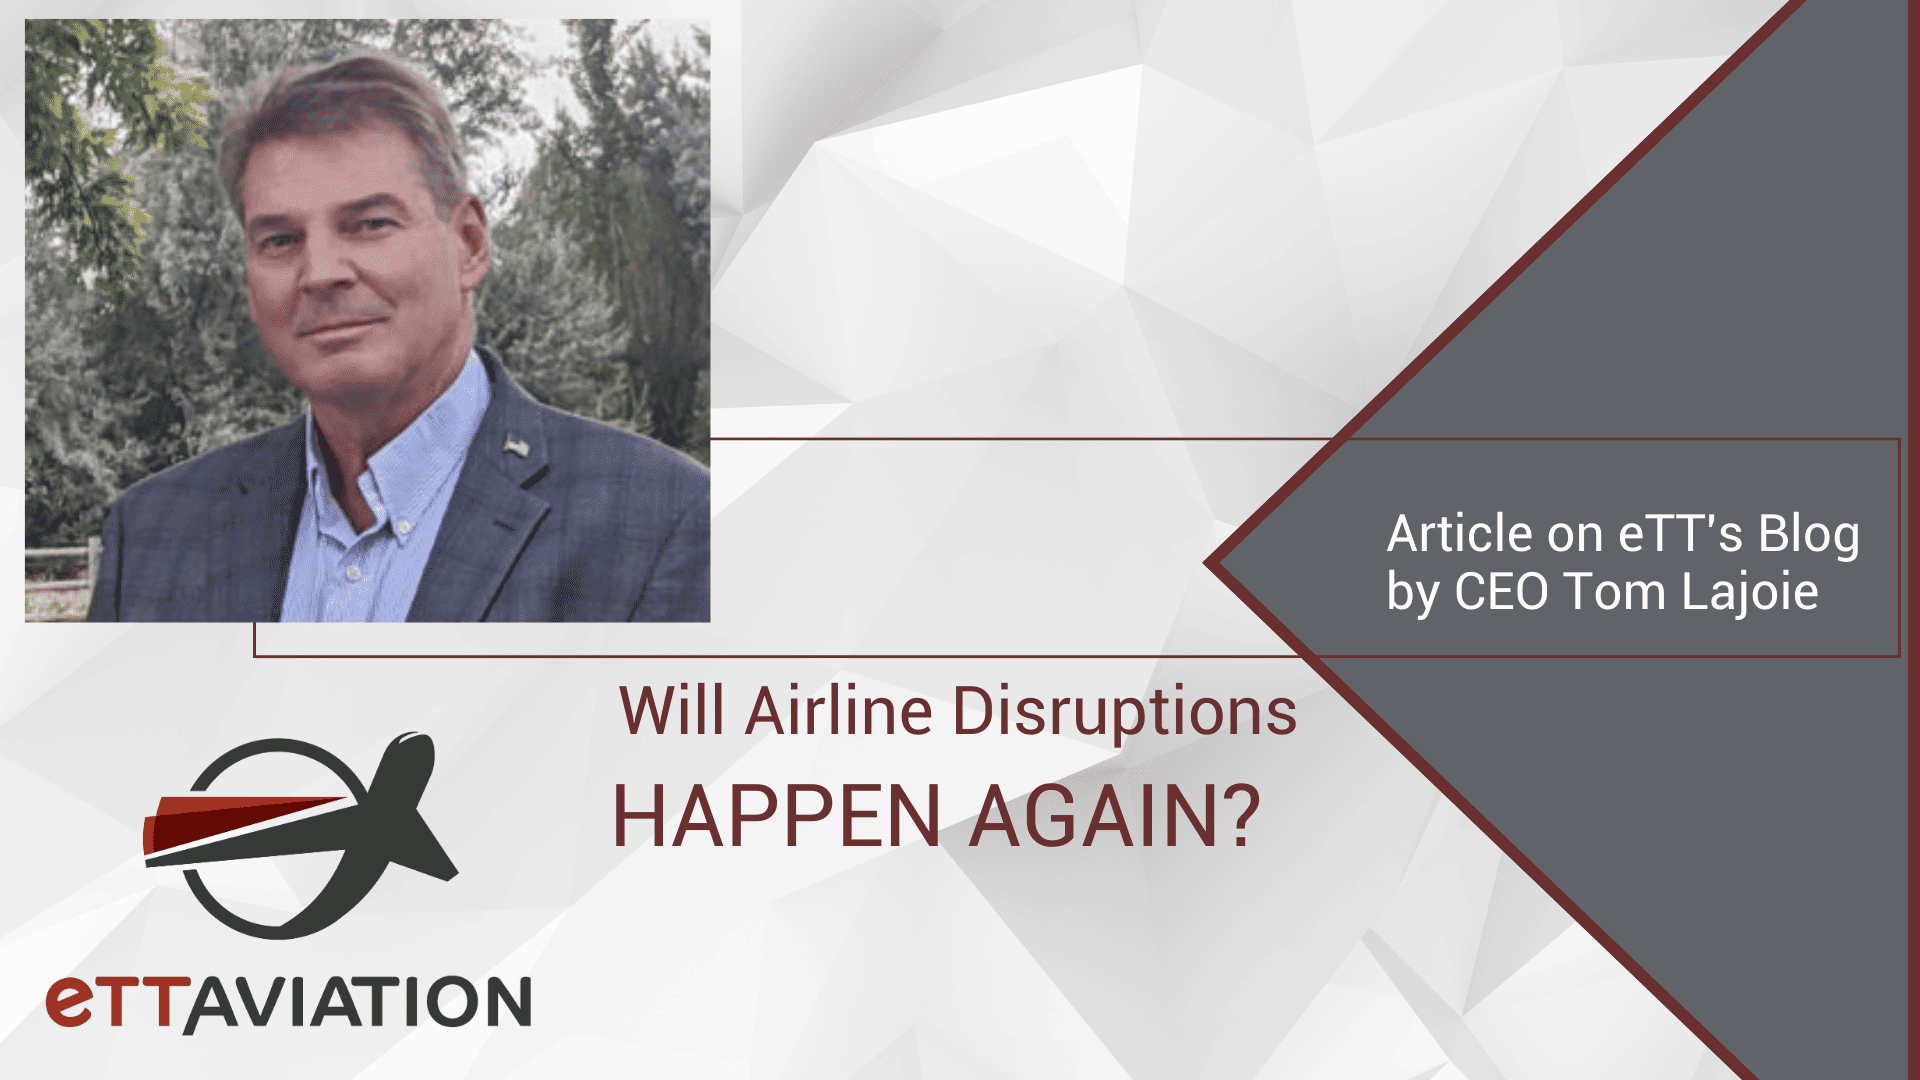 Will airline disruptions happen again?